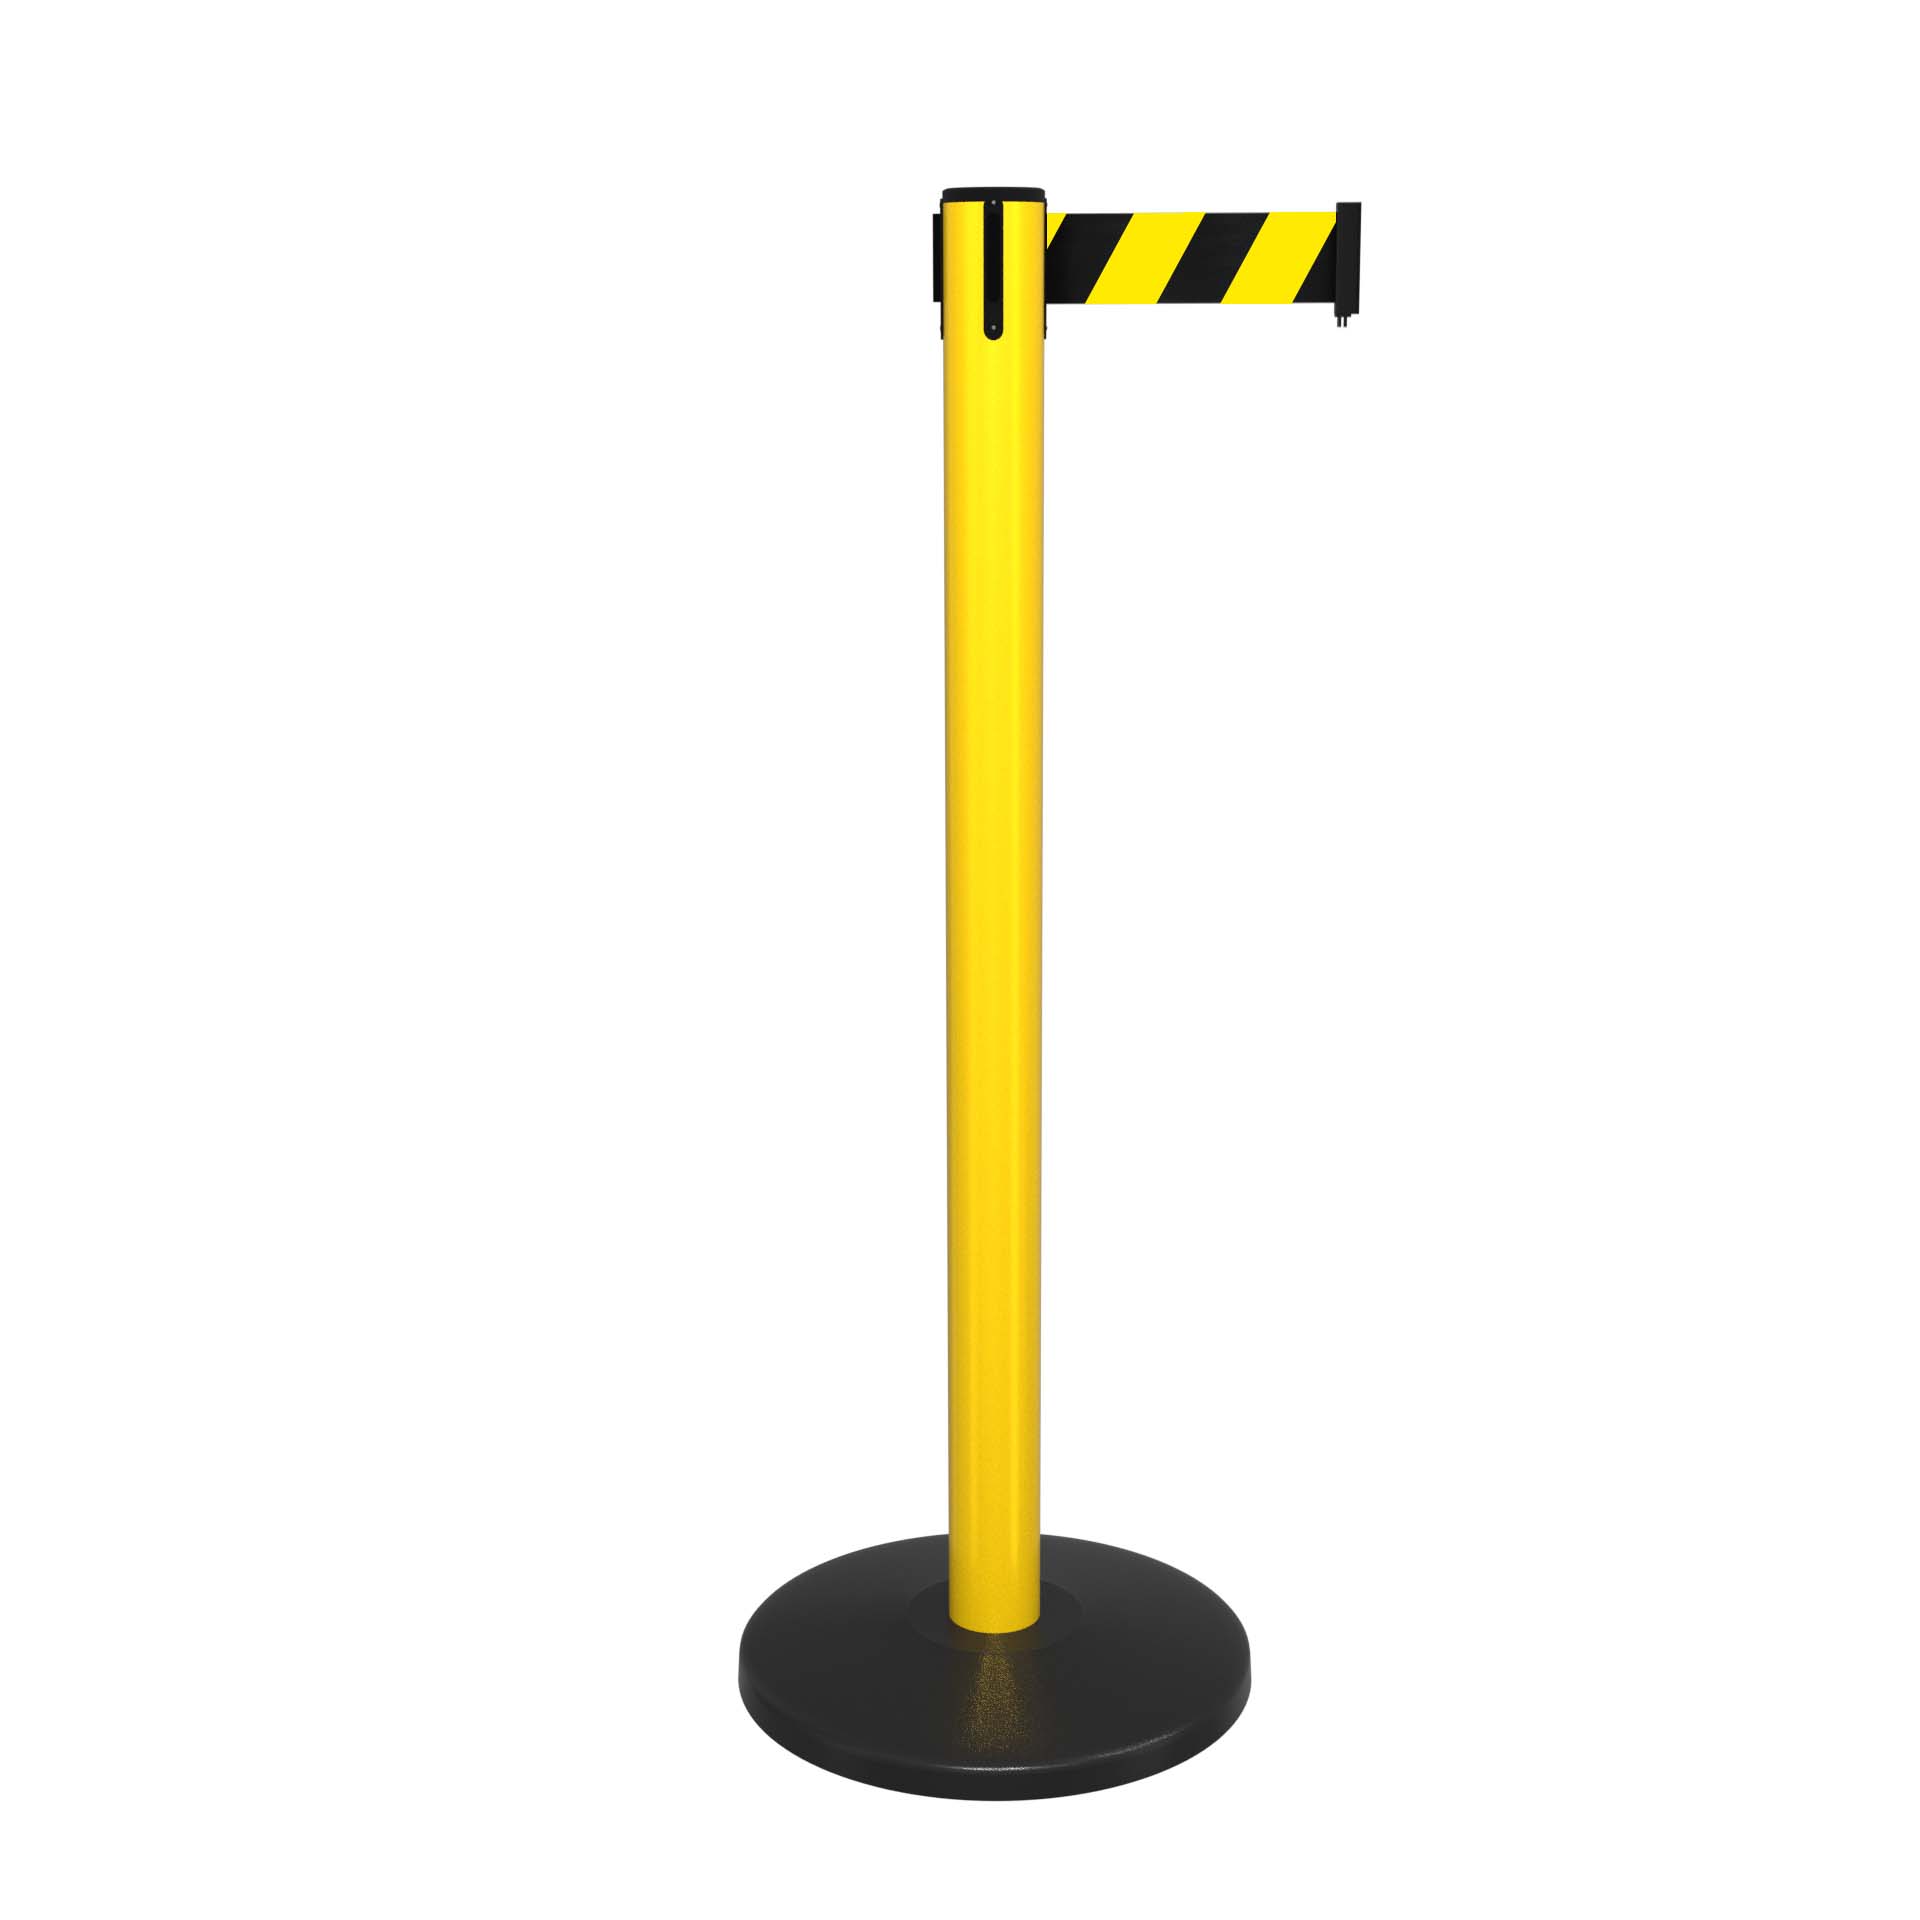 Yellow SafetyMaster 450 Retractable Belt Barrier